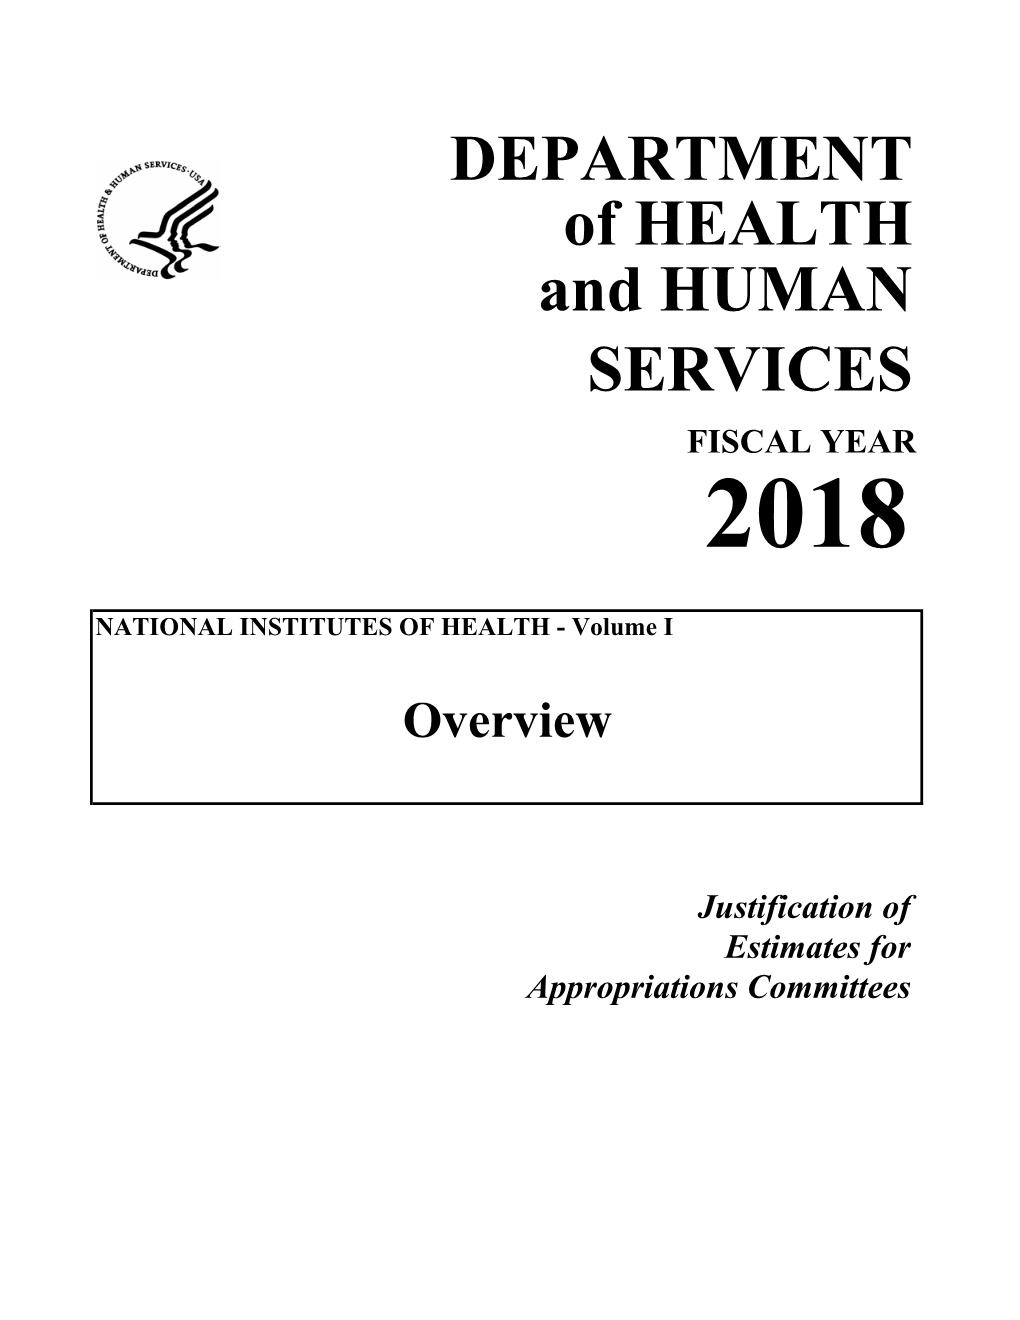 DEPARTMENT of HEALTH and HUMAN SERVICES FISCAL YEAR 2018